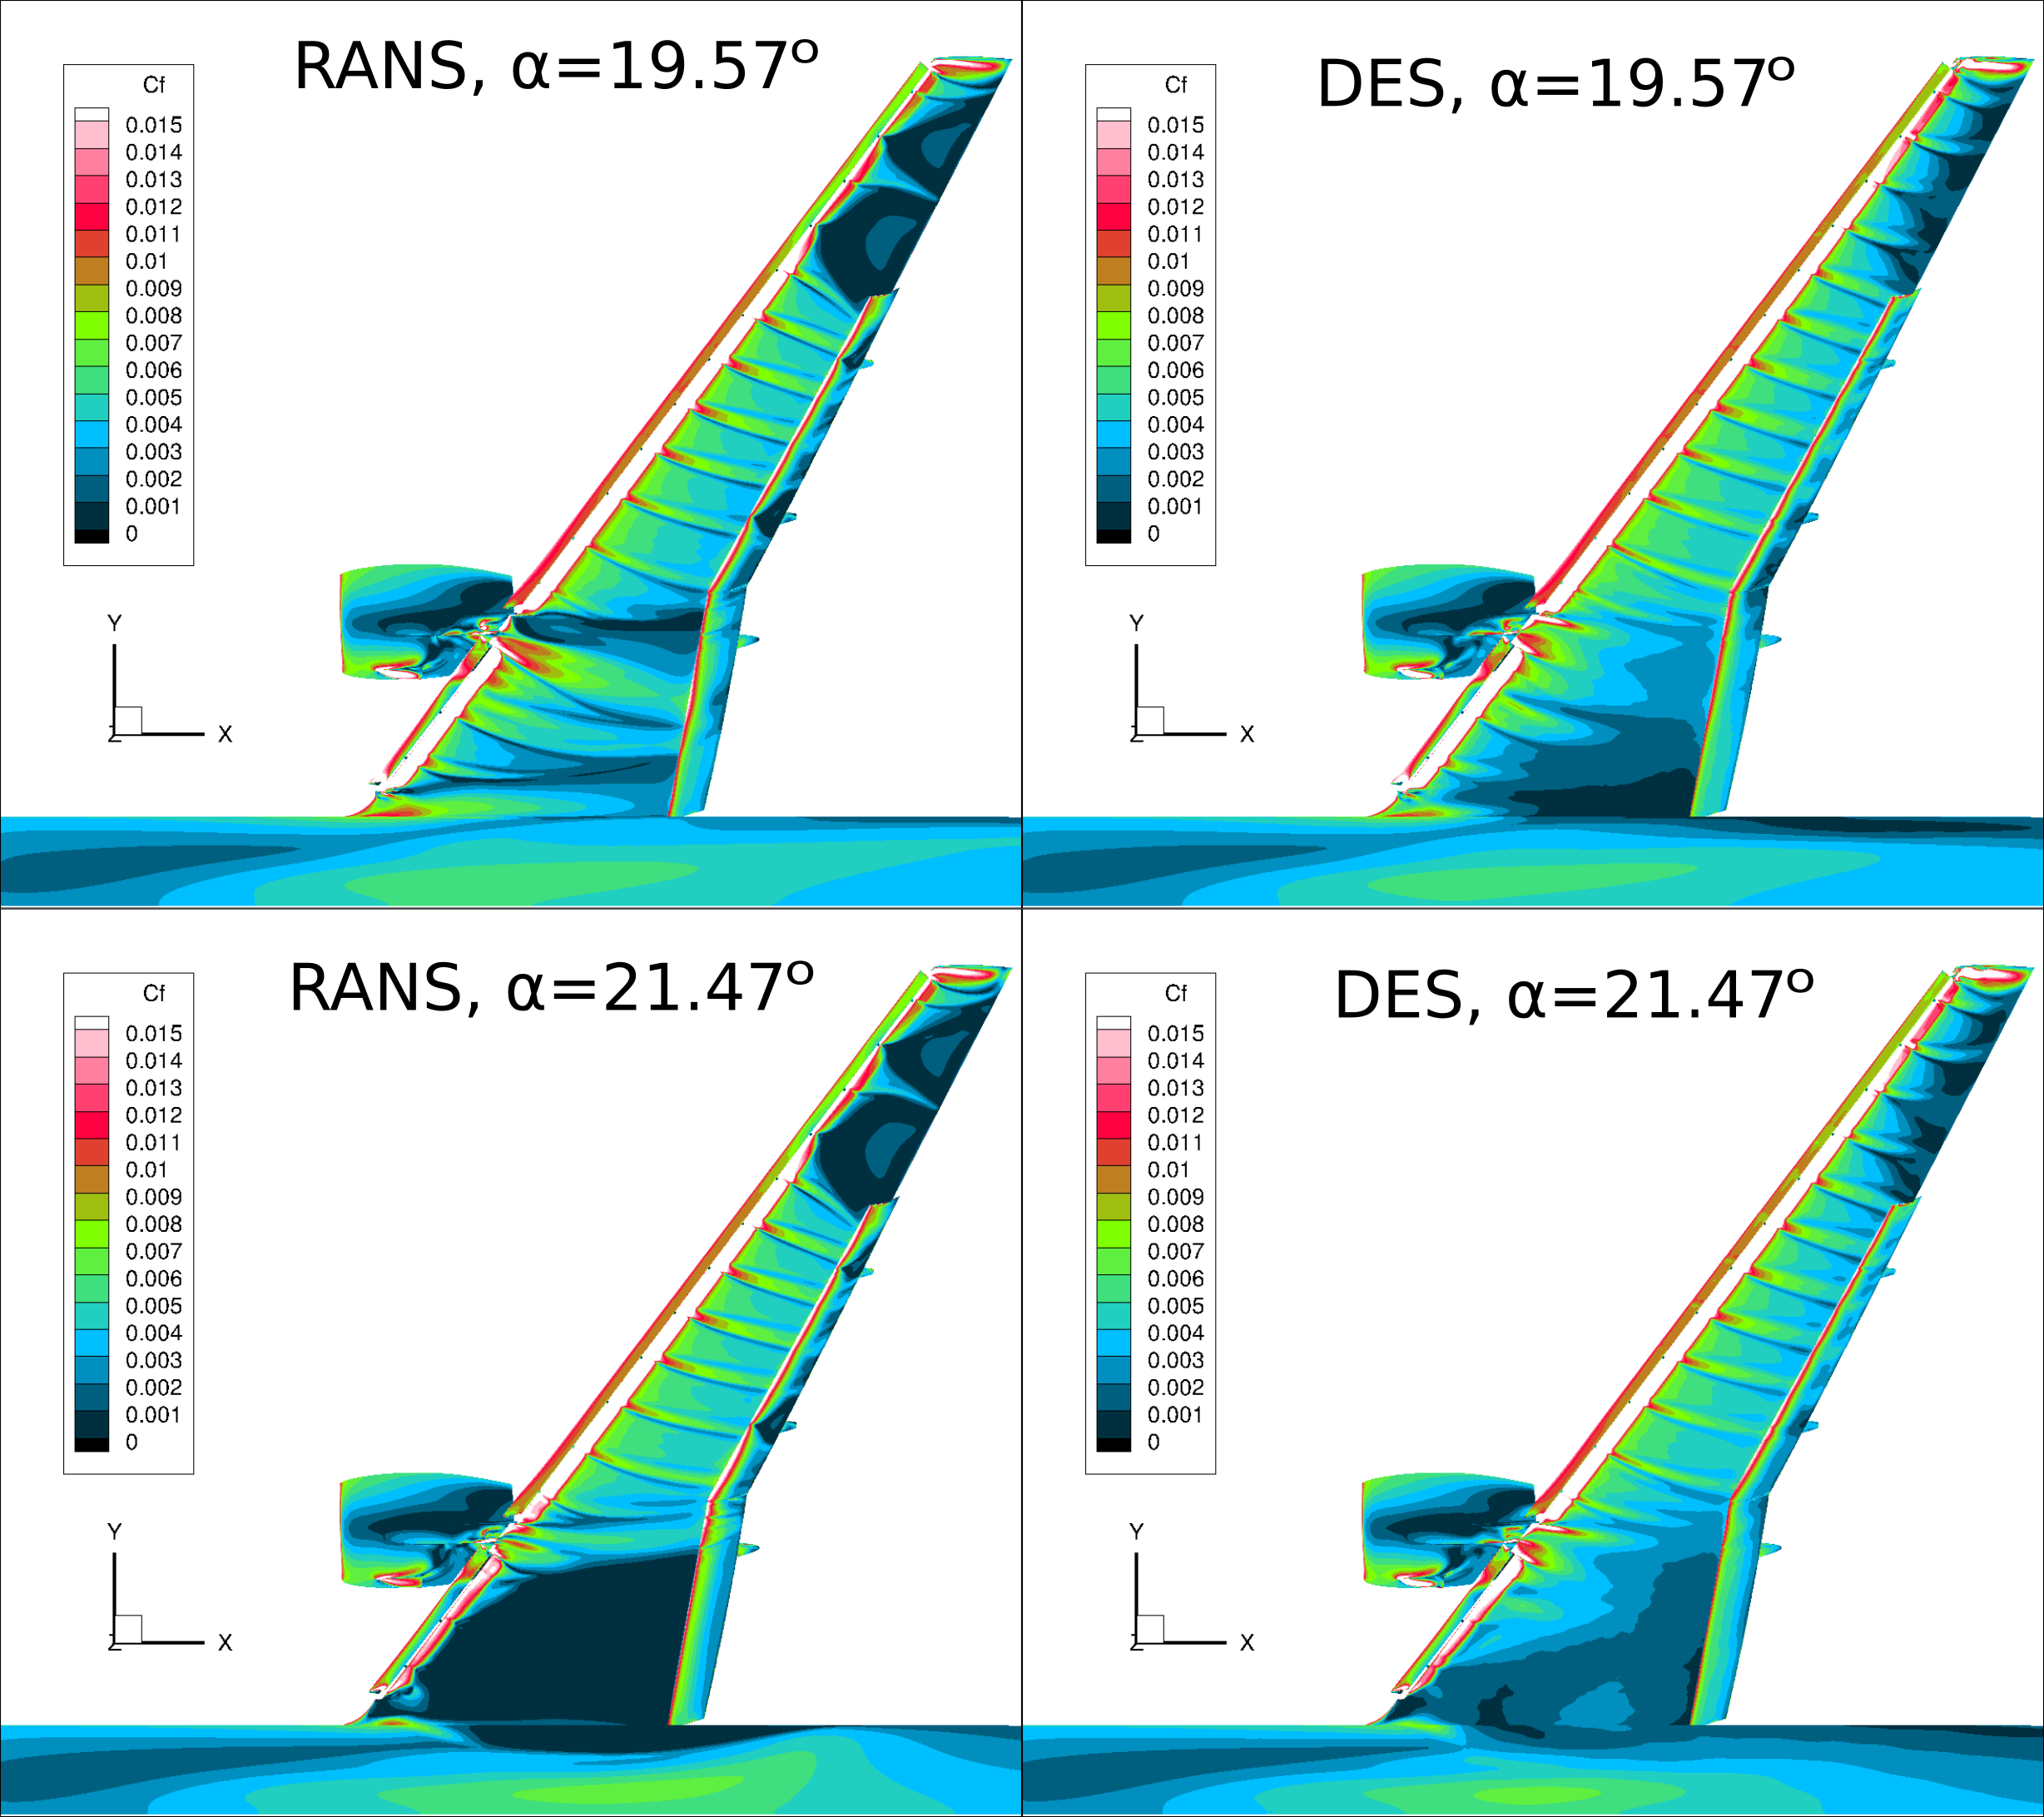 Comparison of C for RANS and DES simulations at a = 19.57 and a = 21.47